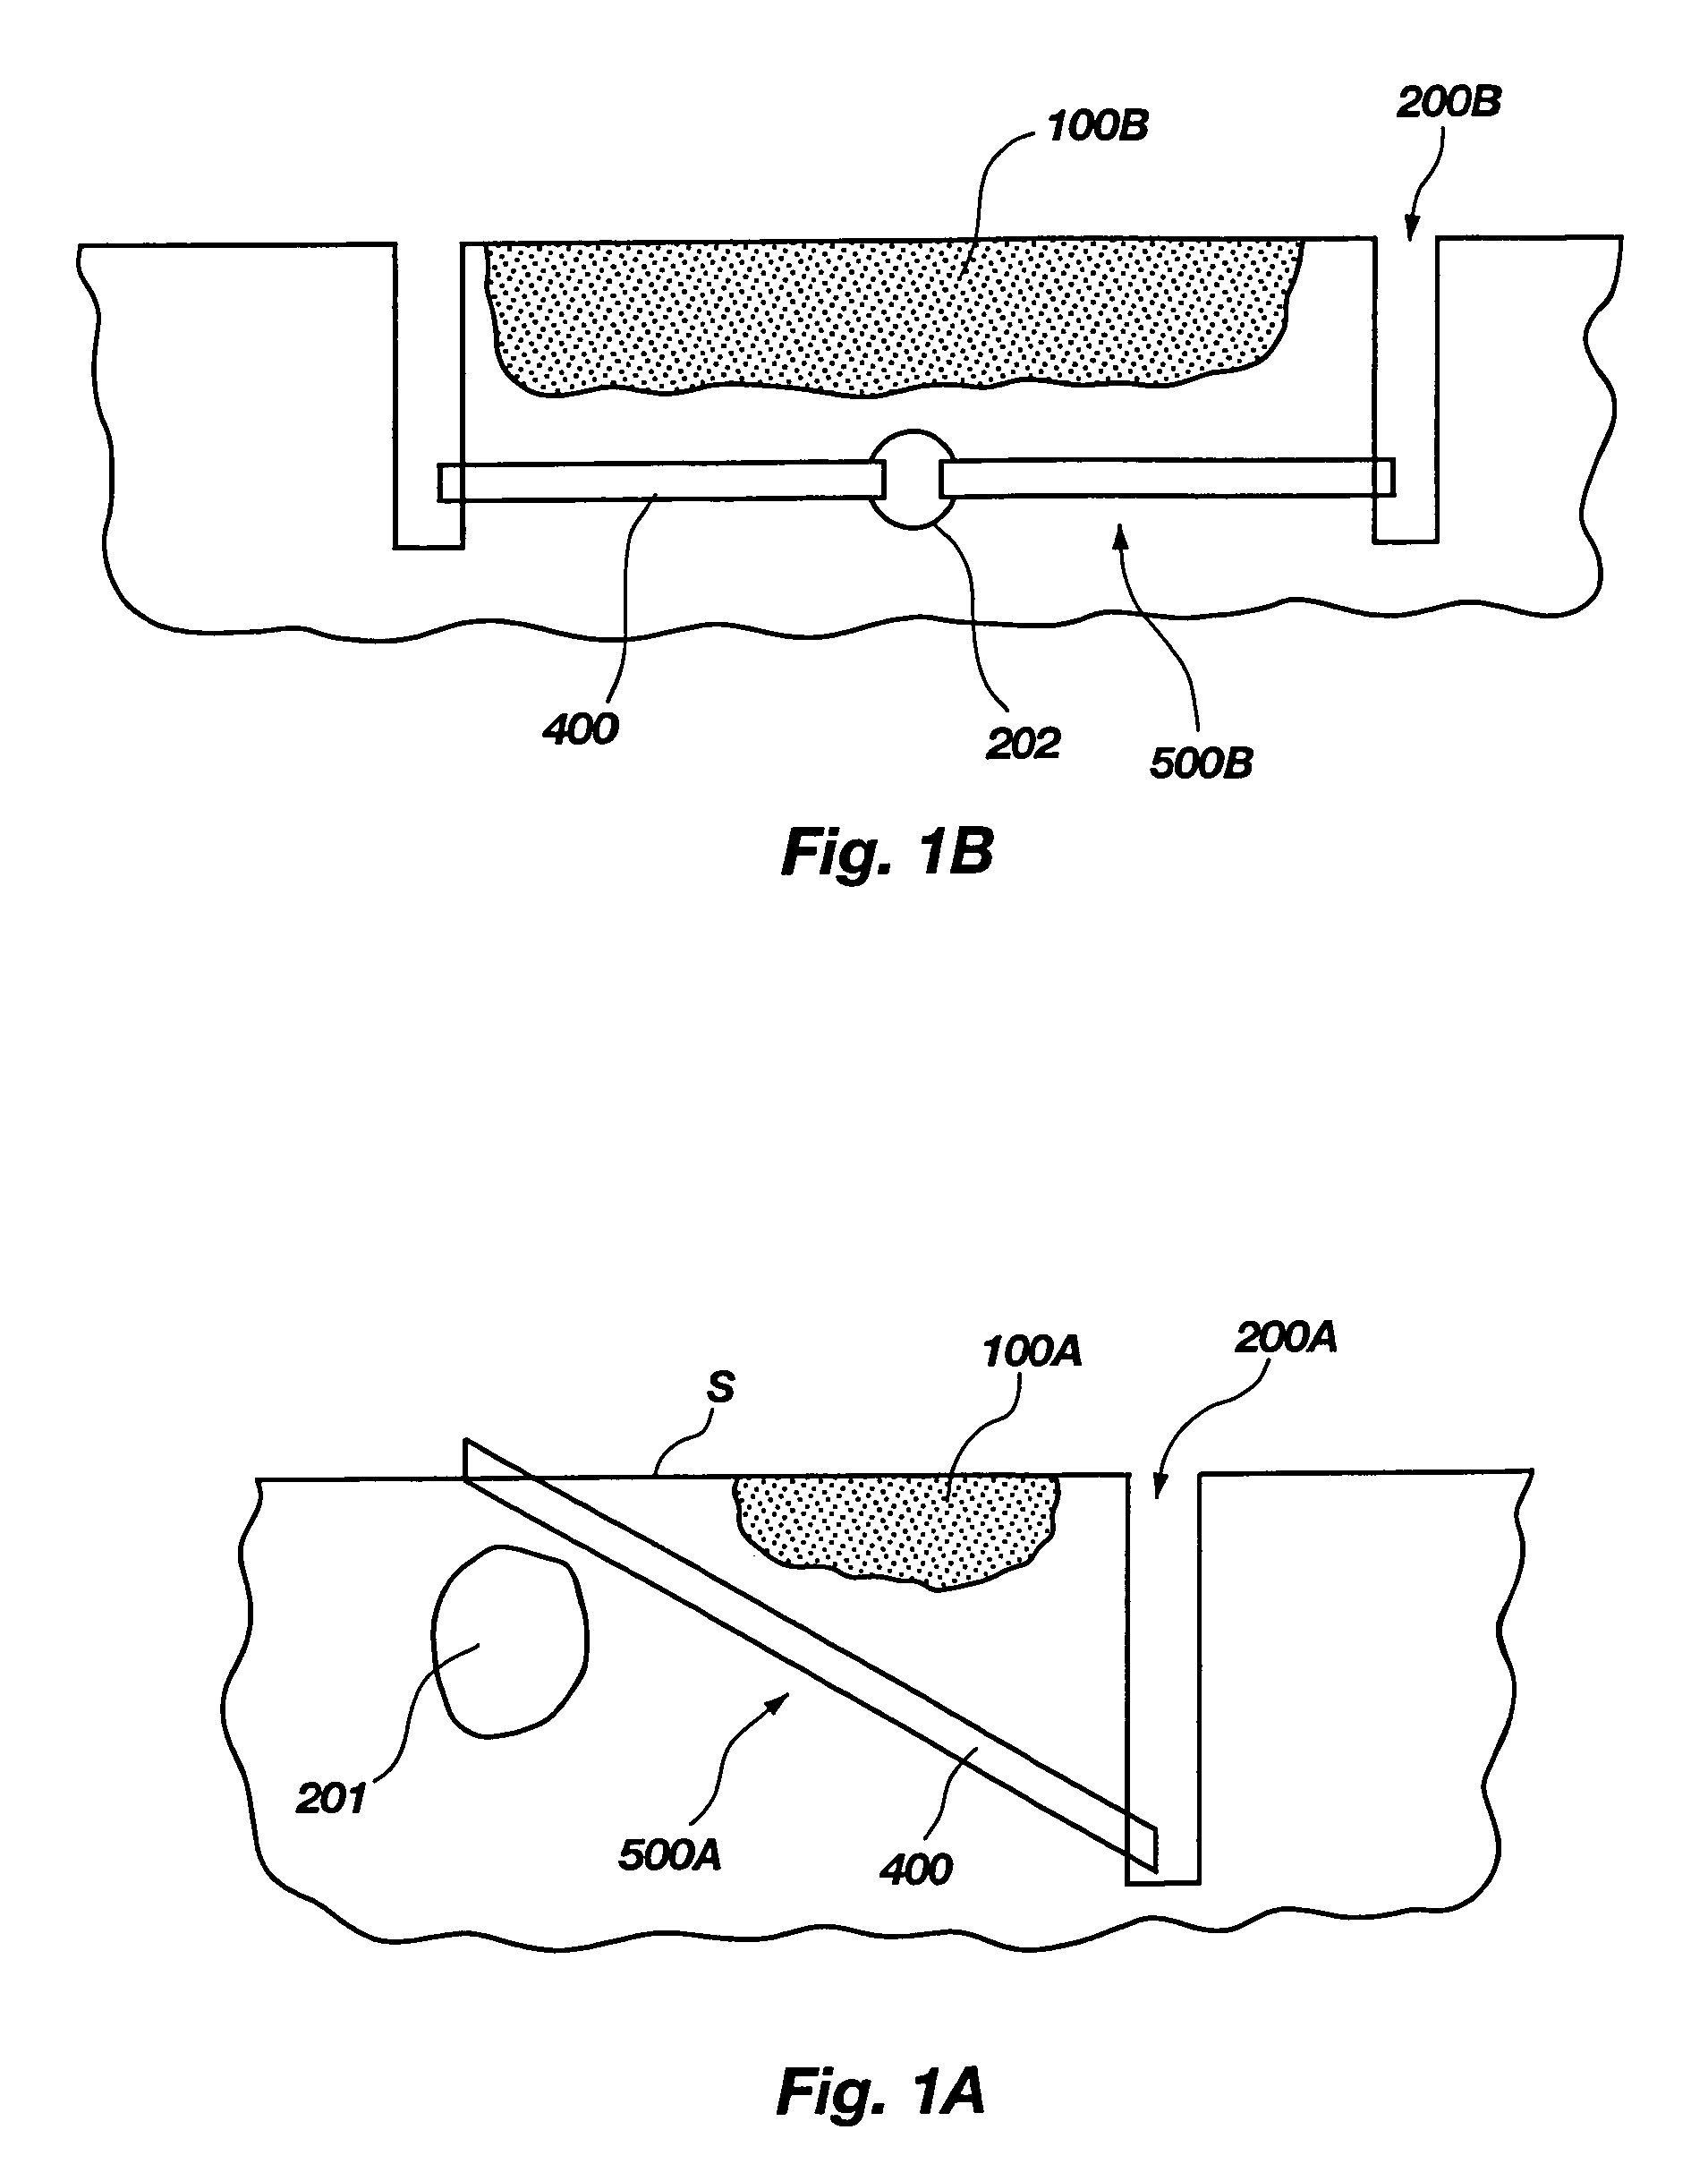 Method of in situ retrieval of contaminants or other substances using a barrier system and leaching solutions